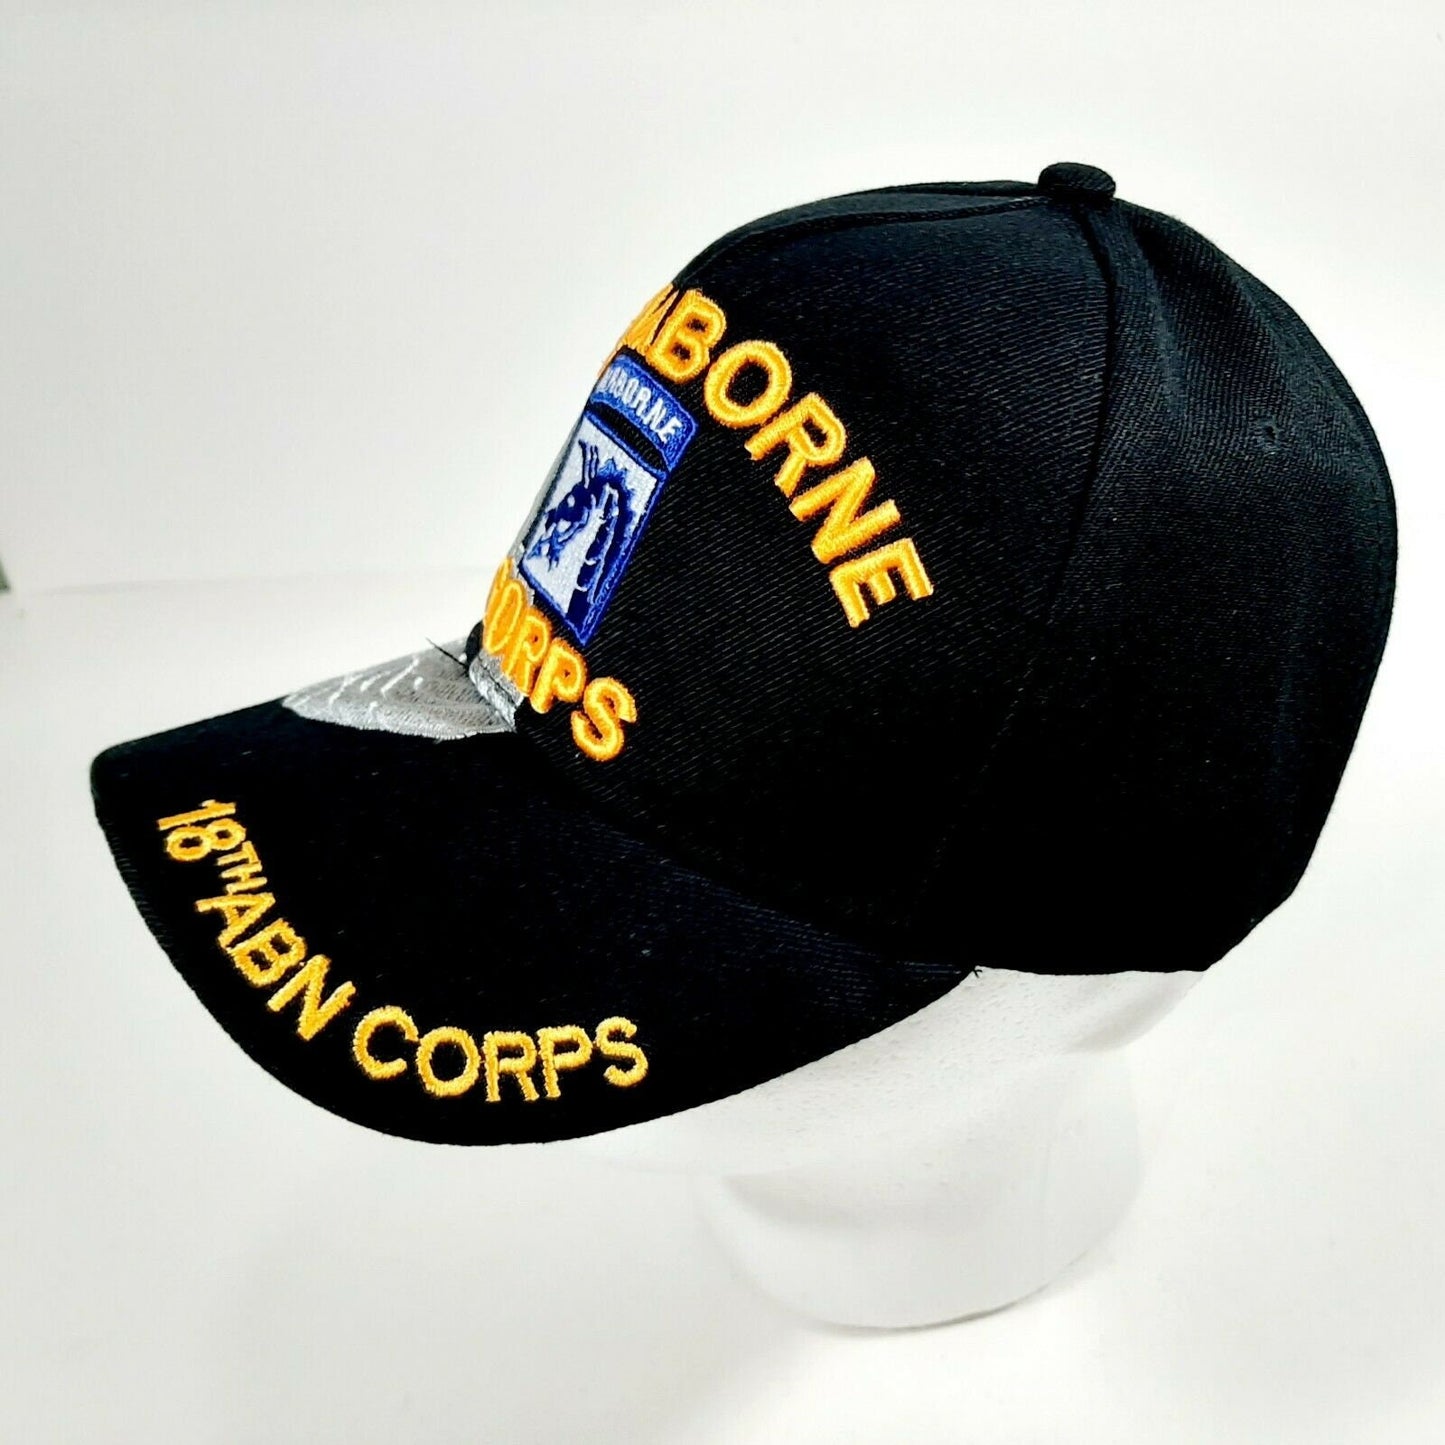 US Army 18th Airborne Corps Men's Ball Cap Hat Black